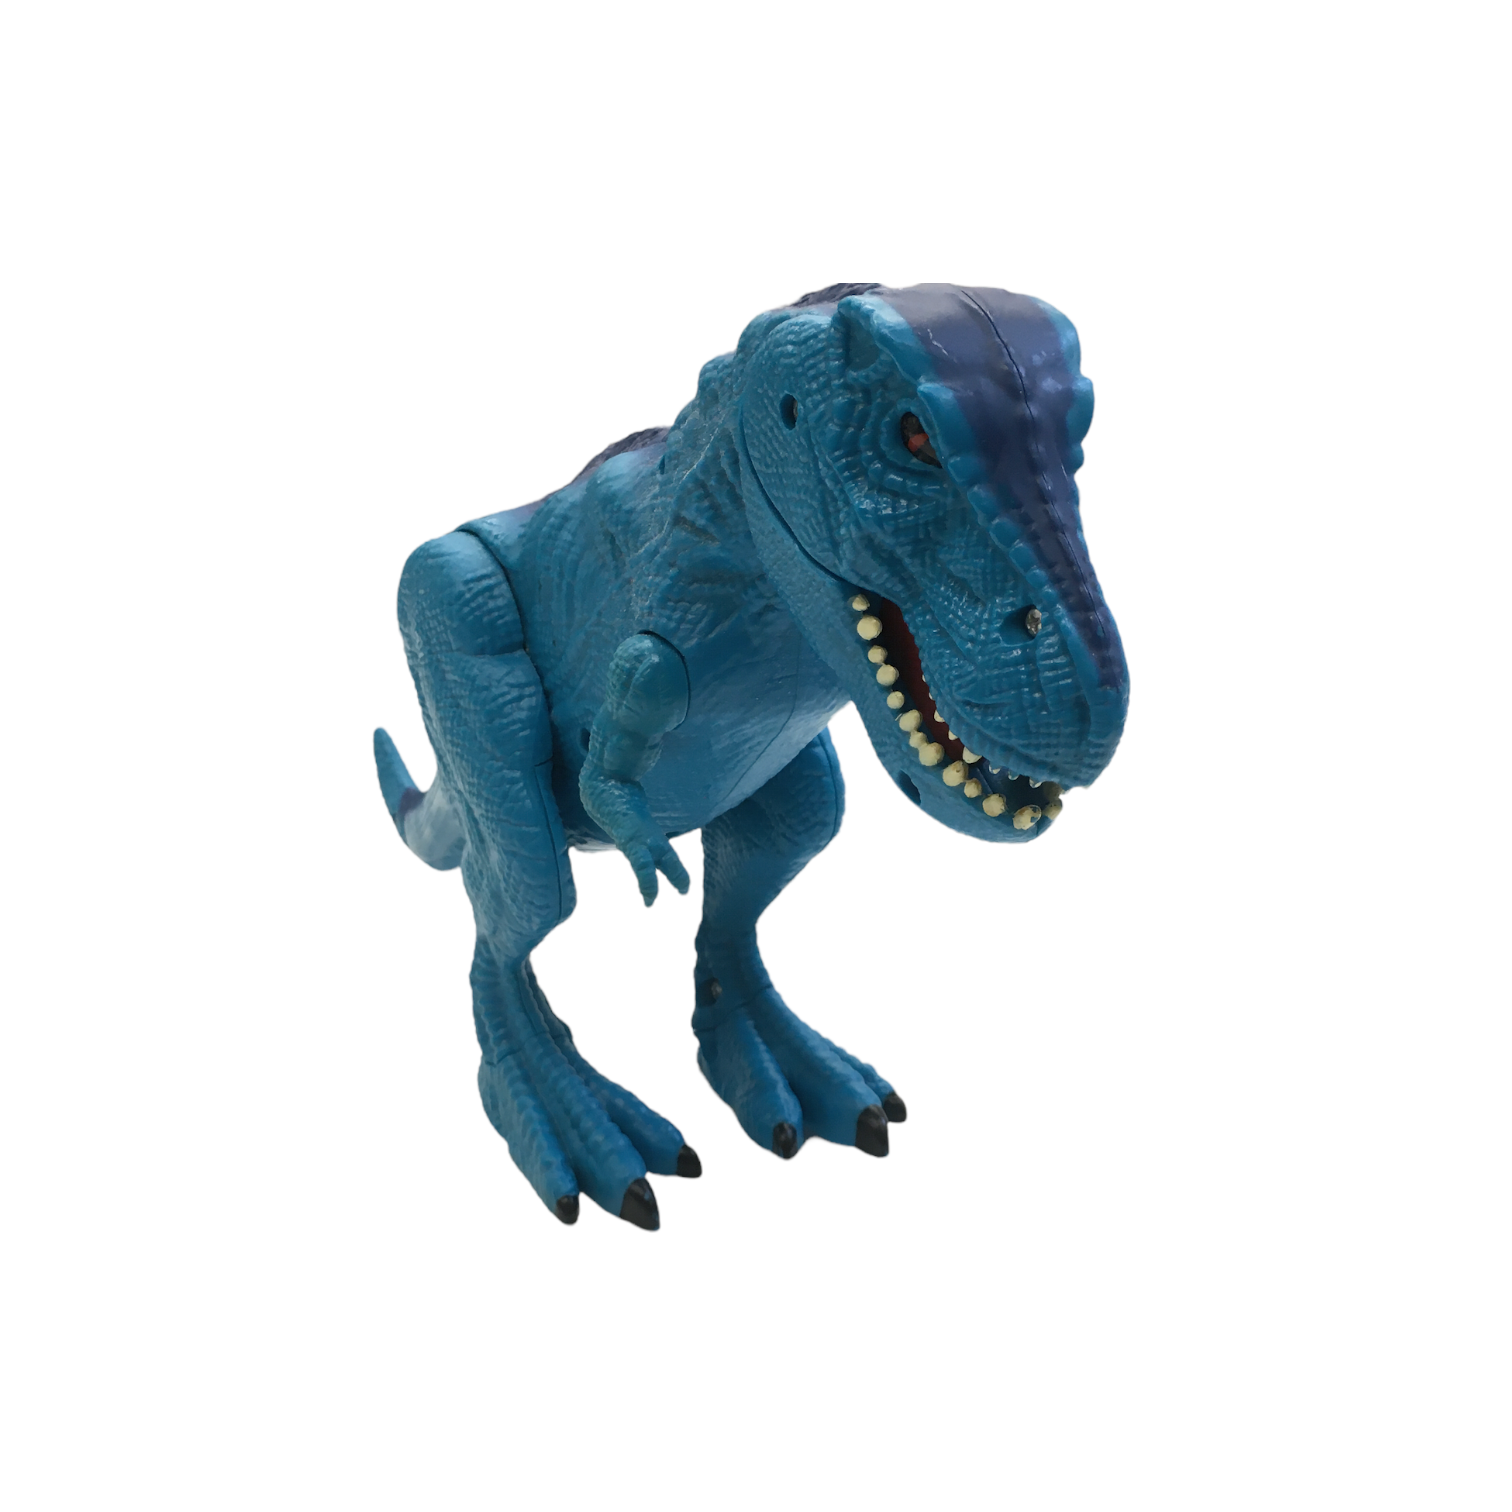 T-Rex (Blue), Toys

#resalerocks #pipsqueakresale #vancouverwa #portland #reusereducerecycle #fashiononabudget #chooseused #consignment #savemoney #shoplocal #weship #keepusopen #shoplocalonline #resale #resaleboutique #mommyandme #minime #fashion #reseller                                                                                                                                      Cross posted, items are located at #PipsqueakResaleBoutique, payments accepted: cash, paypal & credit cards. Any flaws will be described in the comments. More pictures available with link above. Local pick up available at the #VancouverMall, tax will be added (not included in price), shipping available (not included in price, *Clothing, shoes, books & DVDs for $6.99; please contact regarding shipment of toys or other larger items), item can be placed on hold with communication, message with any questions. Join Pipsqueak Resale - Online to see all the new items! Follow us on IG @pipsqueakresale & Thanks for looking! Due to the nature of consignment, any known flaws will be described; ALL SHIPPED SALES ARE FINAL. All items are currently located inside Pipsqueak Resale Boutique as a store front items purchased on location before items are prepared for shipment will be refunded.